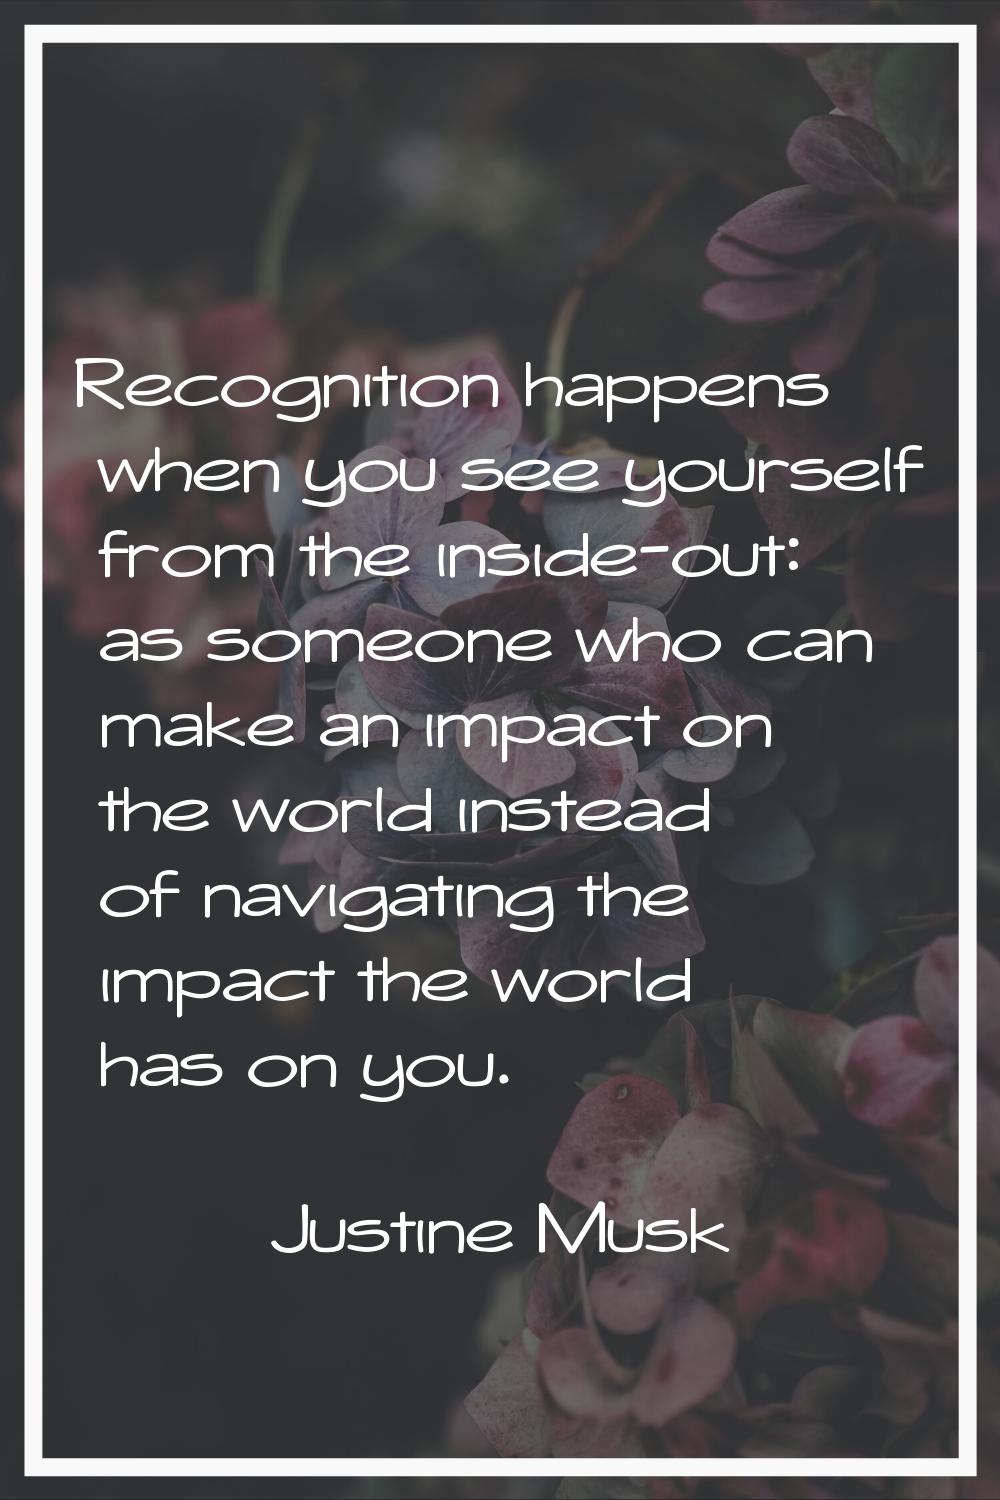 Recognition happens when you see yourself from the inside-out: as someone who can make an impact on